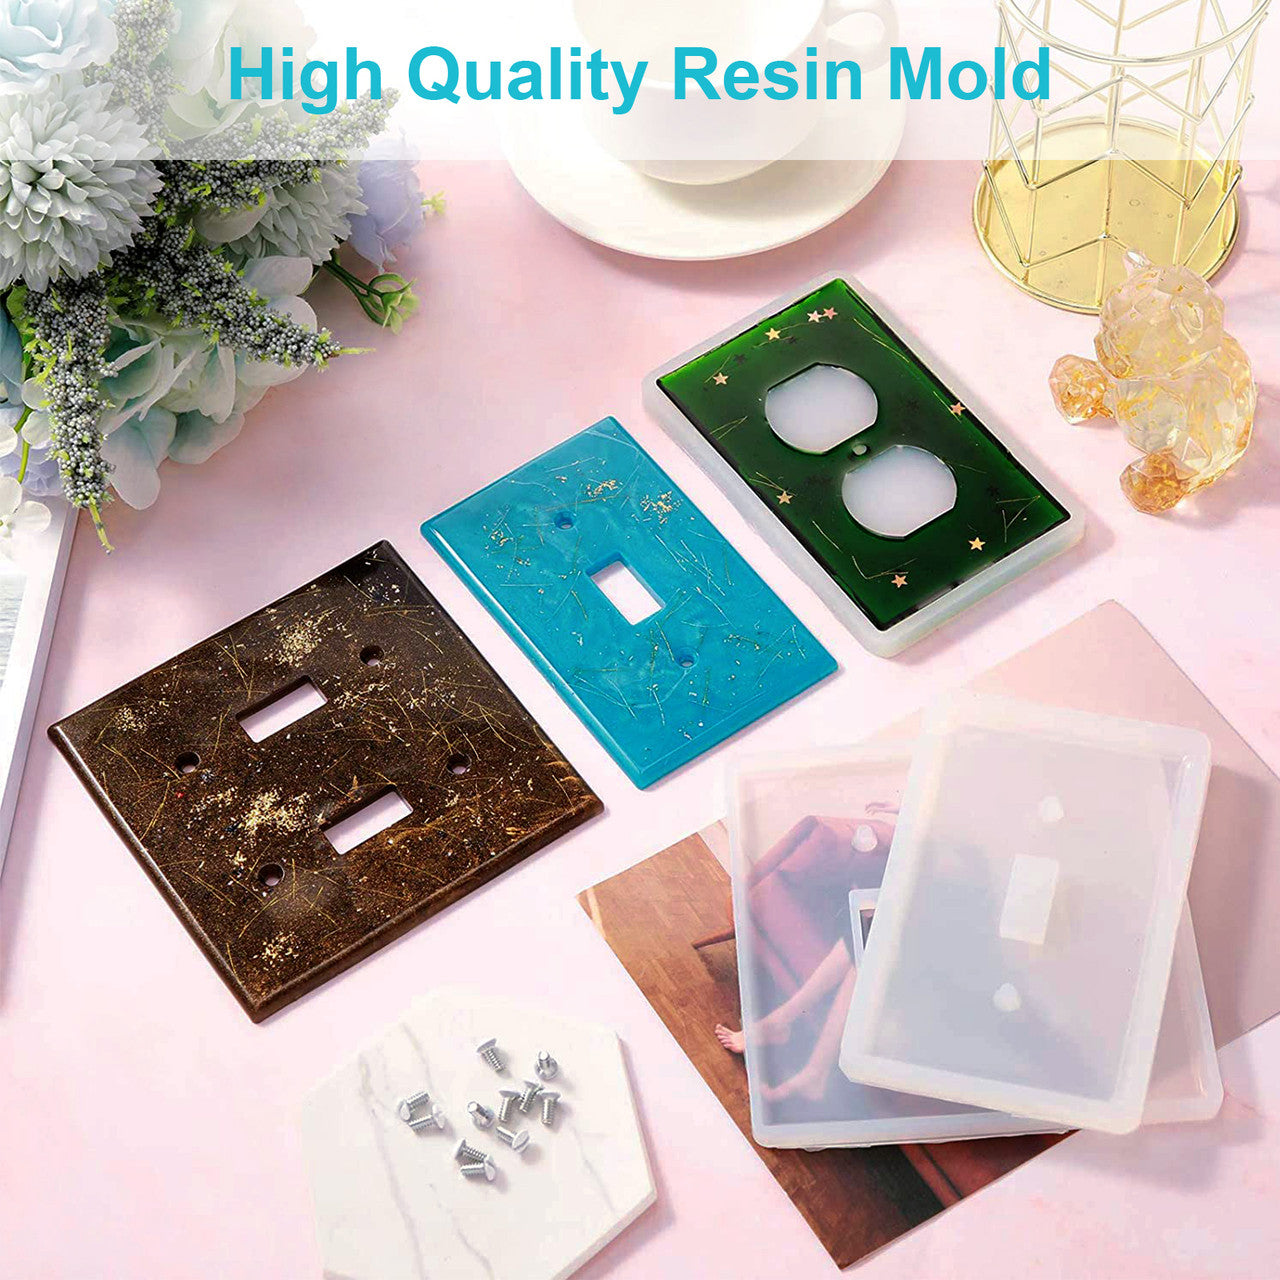 Socket Panel Light Switch Cover Silicone Molds Epoxy Resin Mold DIY Crafts, 3pc